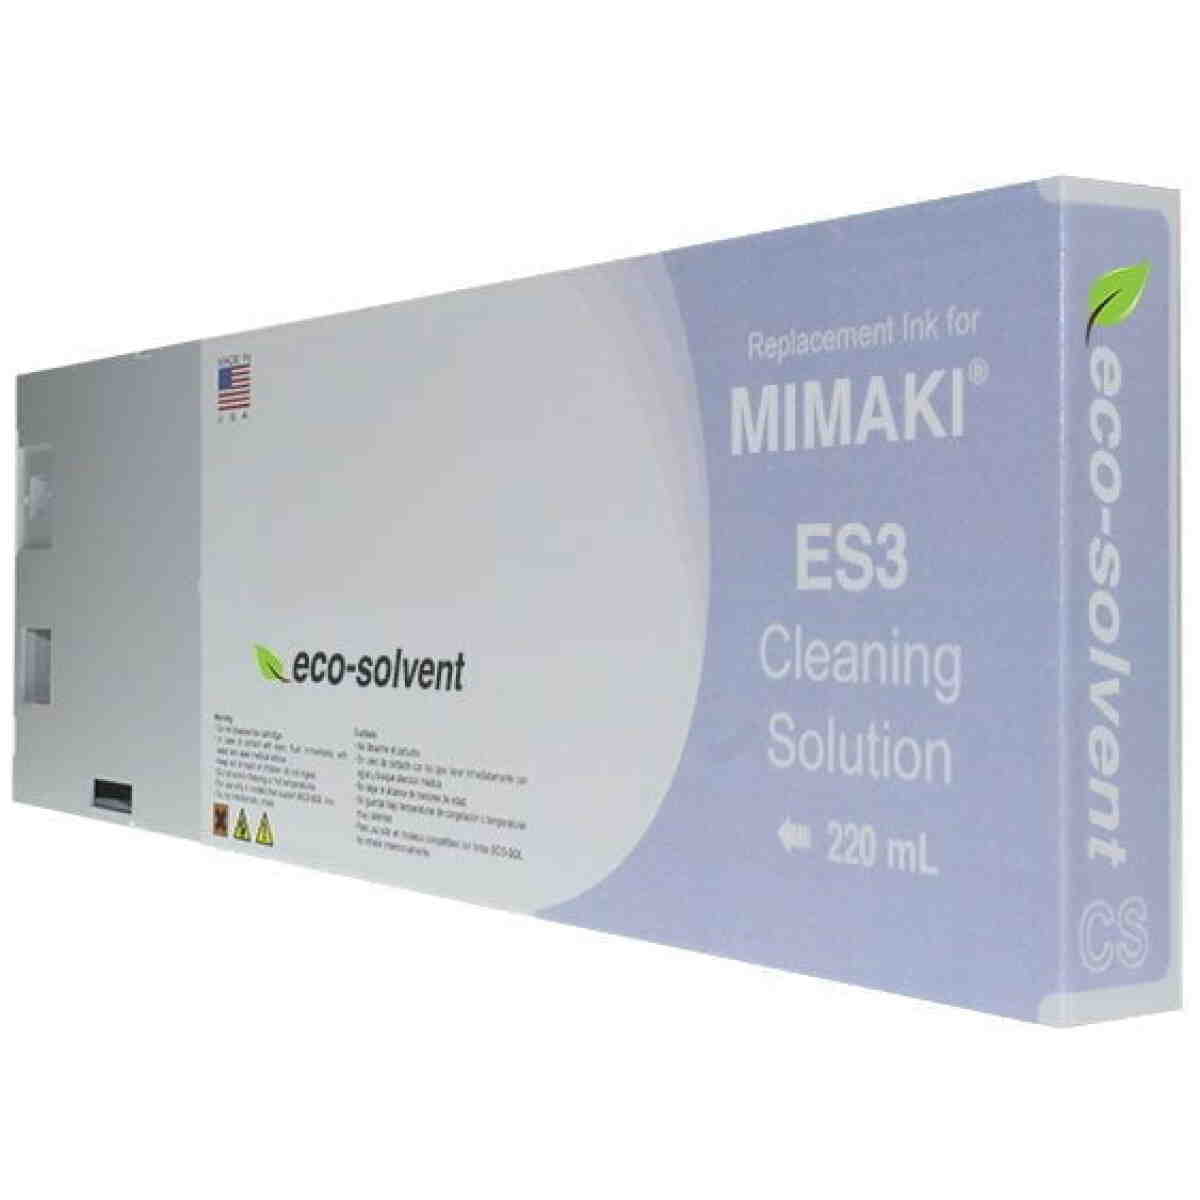 STS® Cleaning Solution Cartridge For Mimaki Eco-Solvent ES3 - 220 Ml STS®